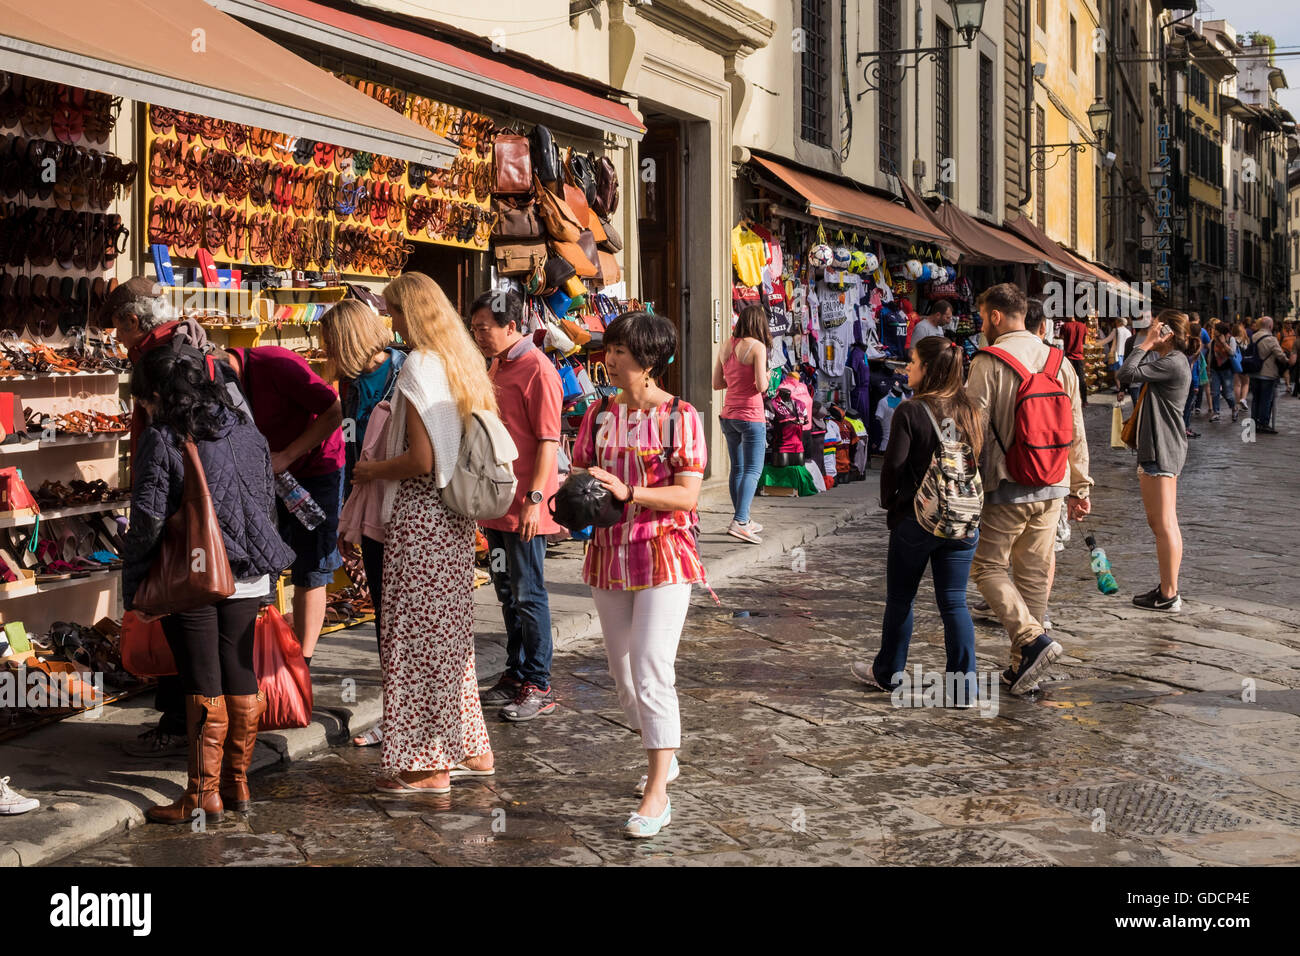 Tourists at souvenir stalls in the Piazza San lorenzo, Florence, Tuscany, Italy Stock Photo